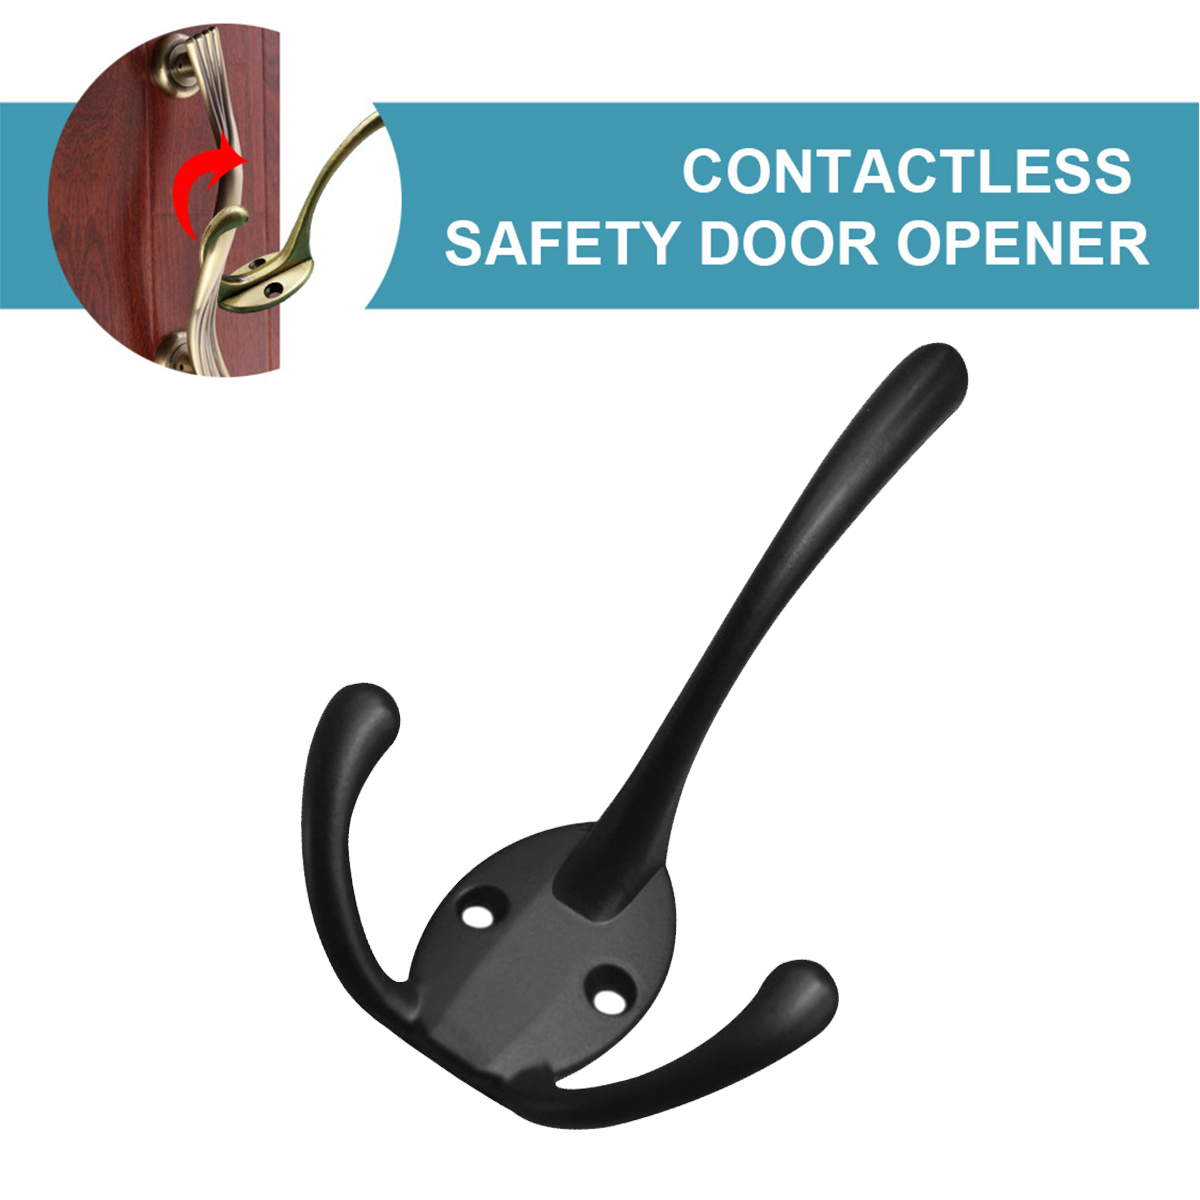 Black-Metal-Contactless-Safety-Hygiene-Door-Opener-NO-Touch-Key-for-Hand-1681855-4